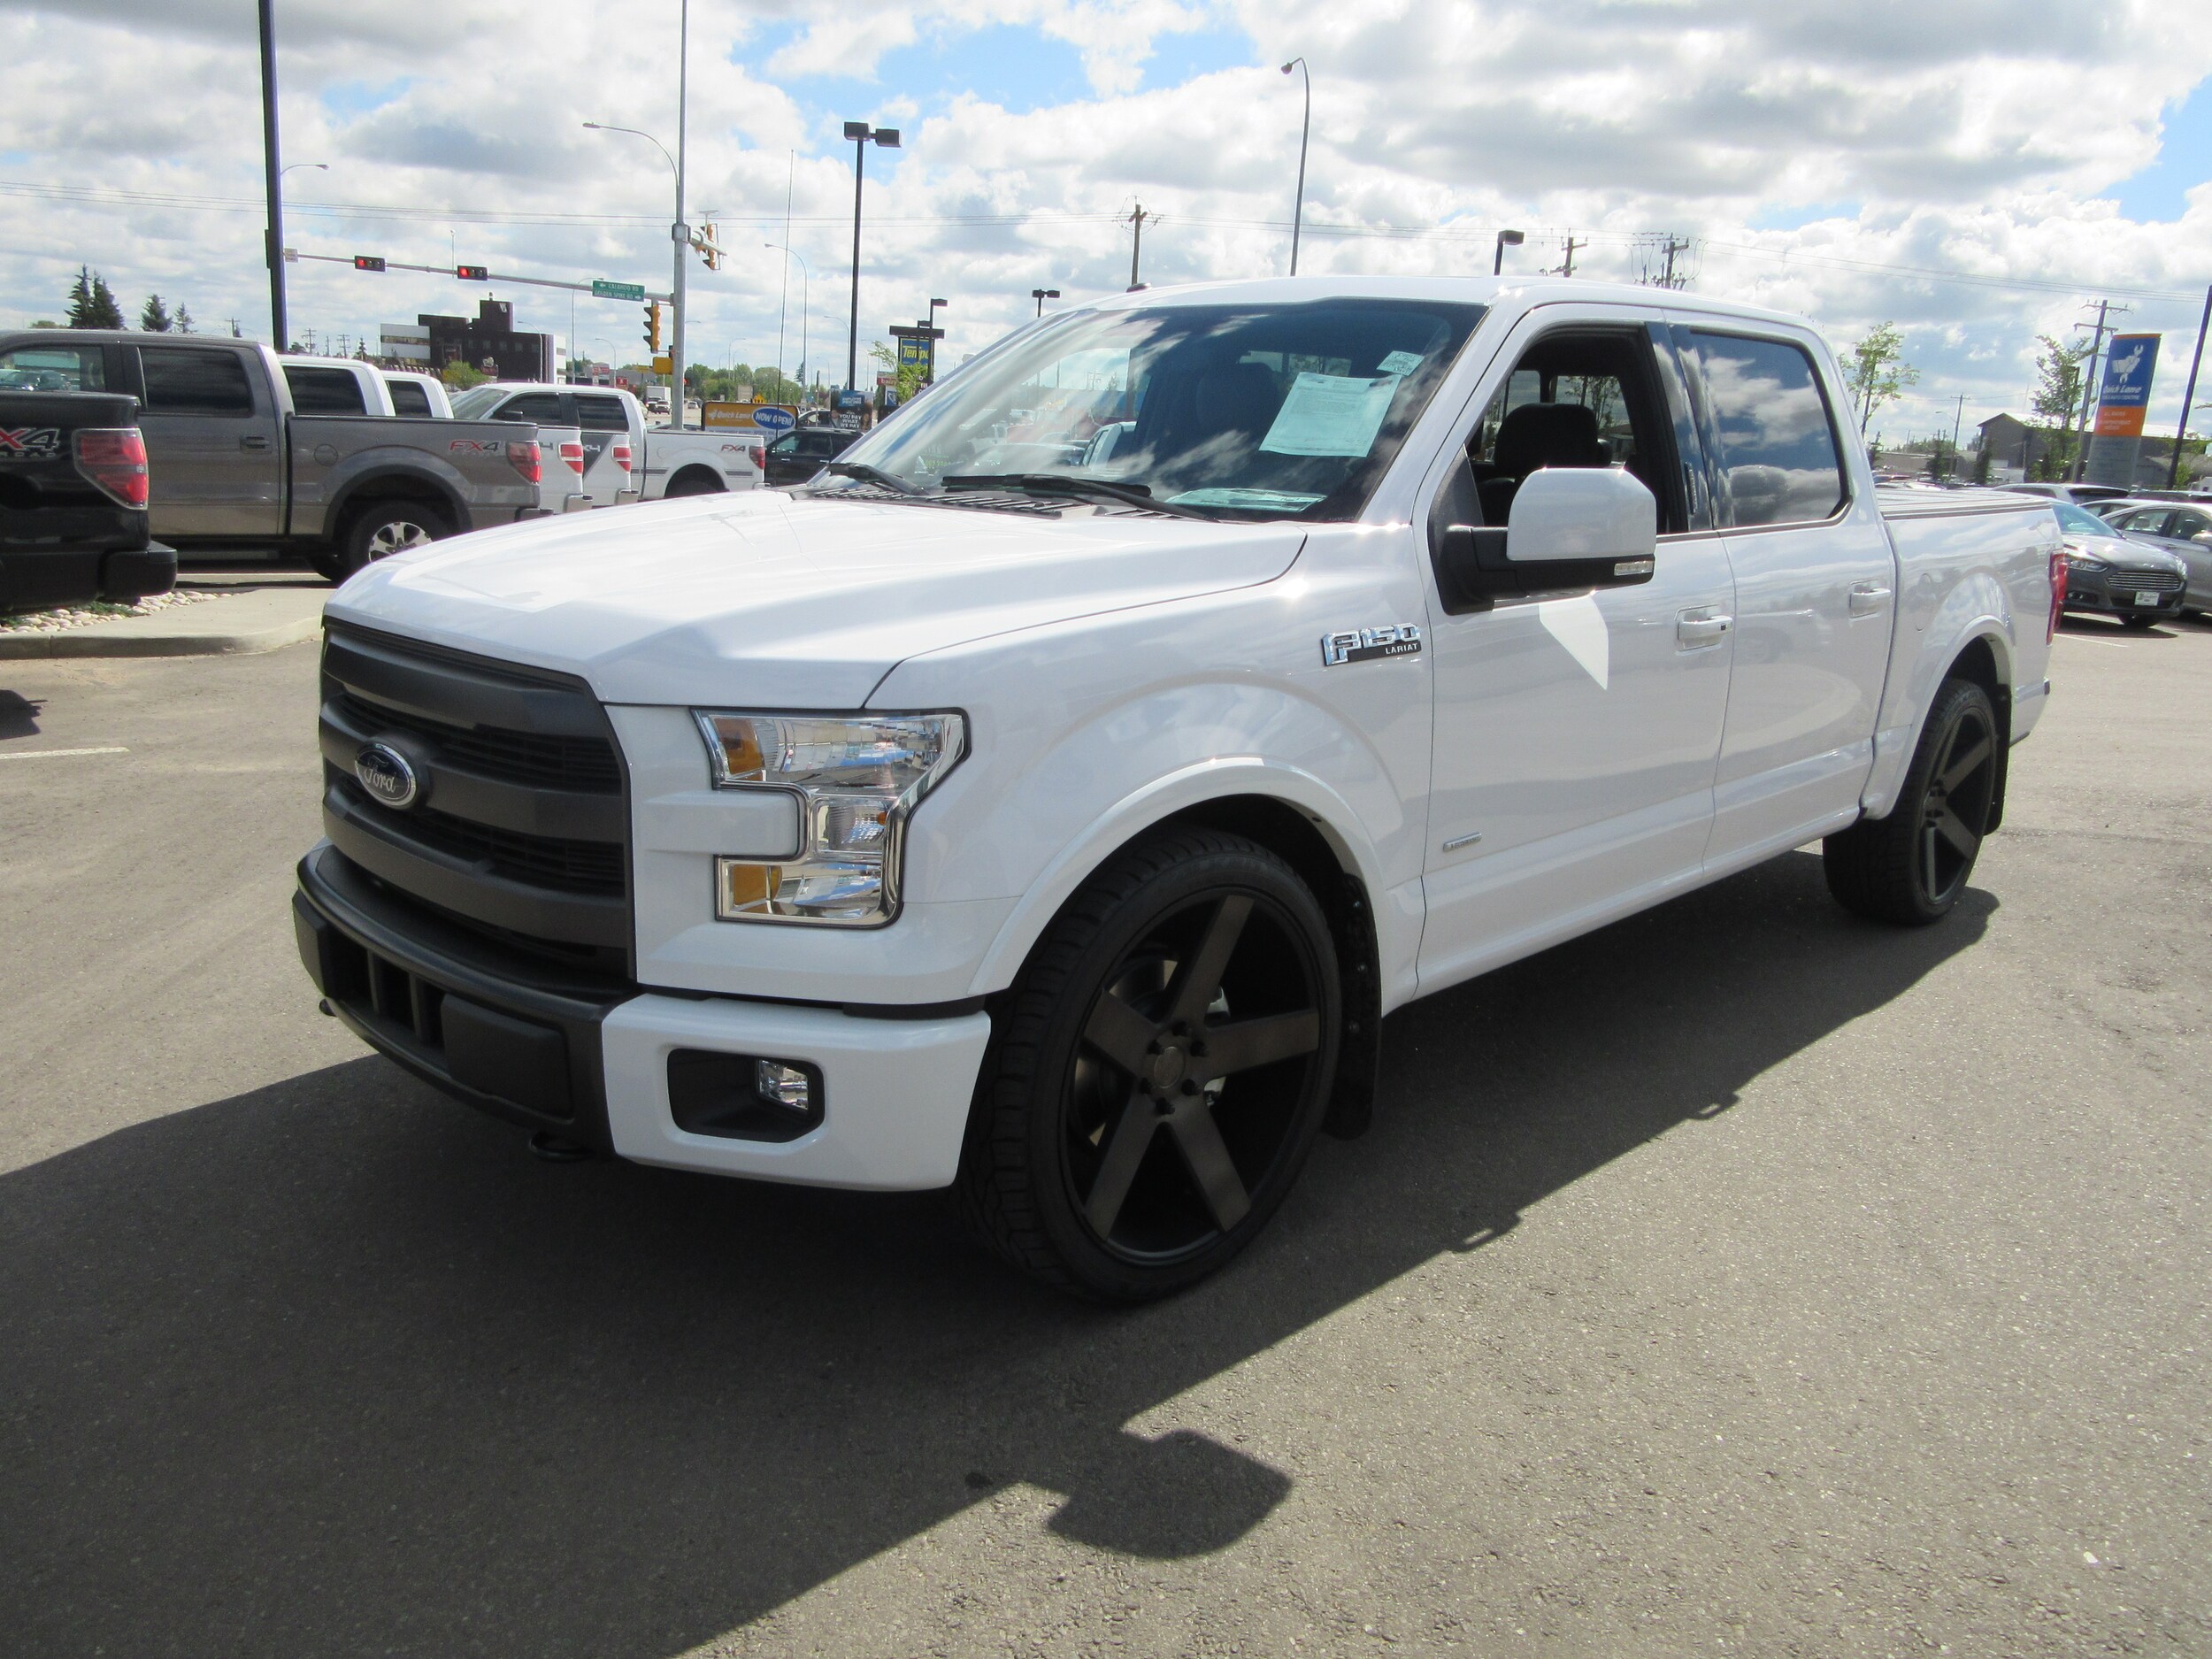 Competition ford spruce grove #8